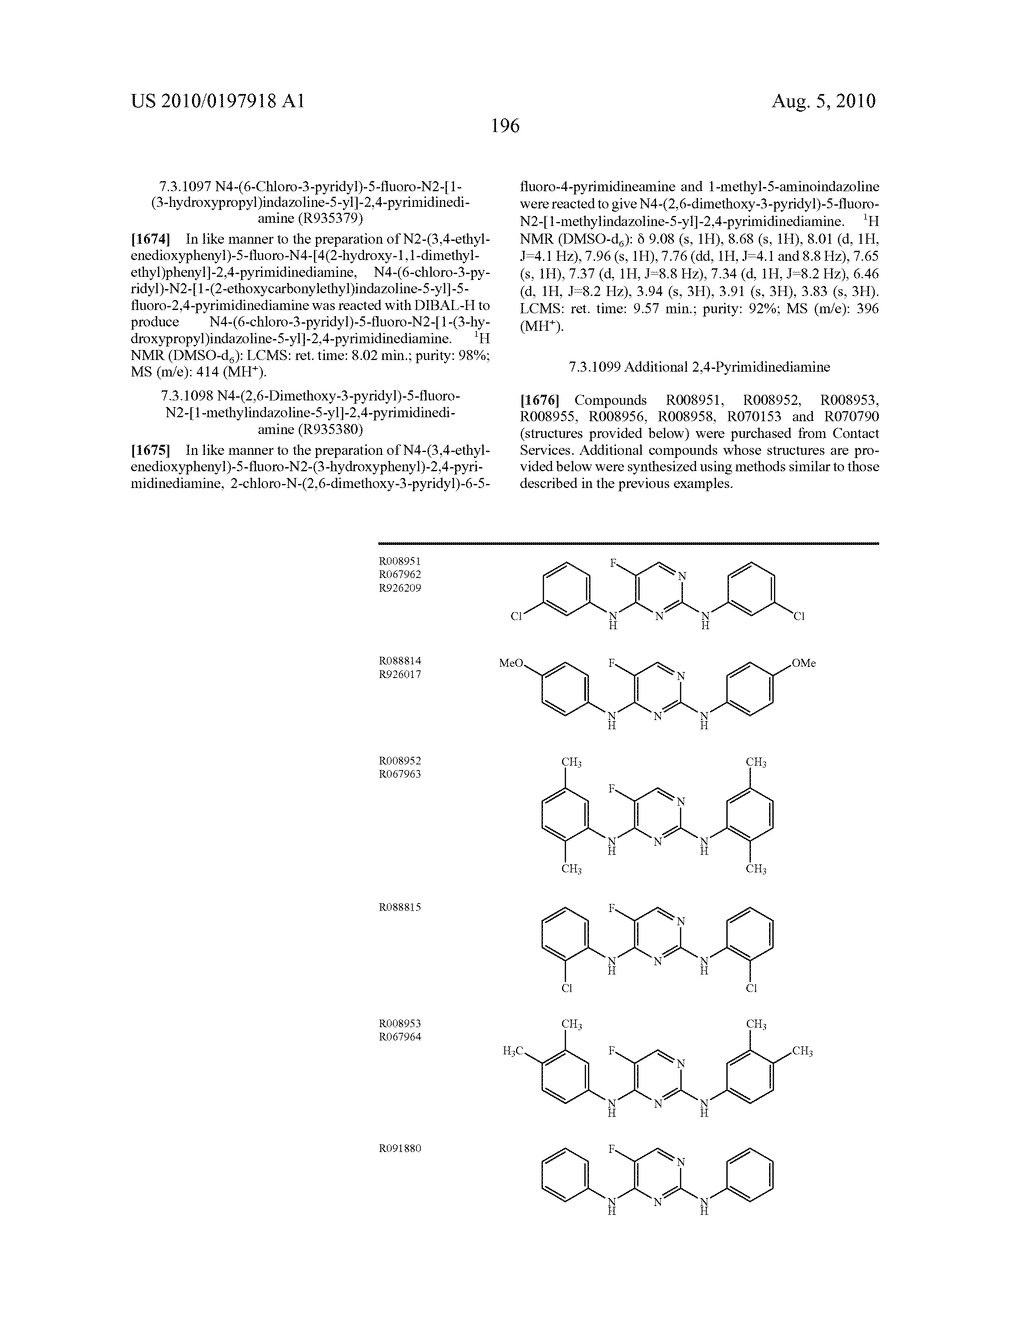 2,4-PYRIMIDINEDIAMINE COMPOUNDS AND THEIR USES - diagram, schematic, and image 211